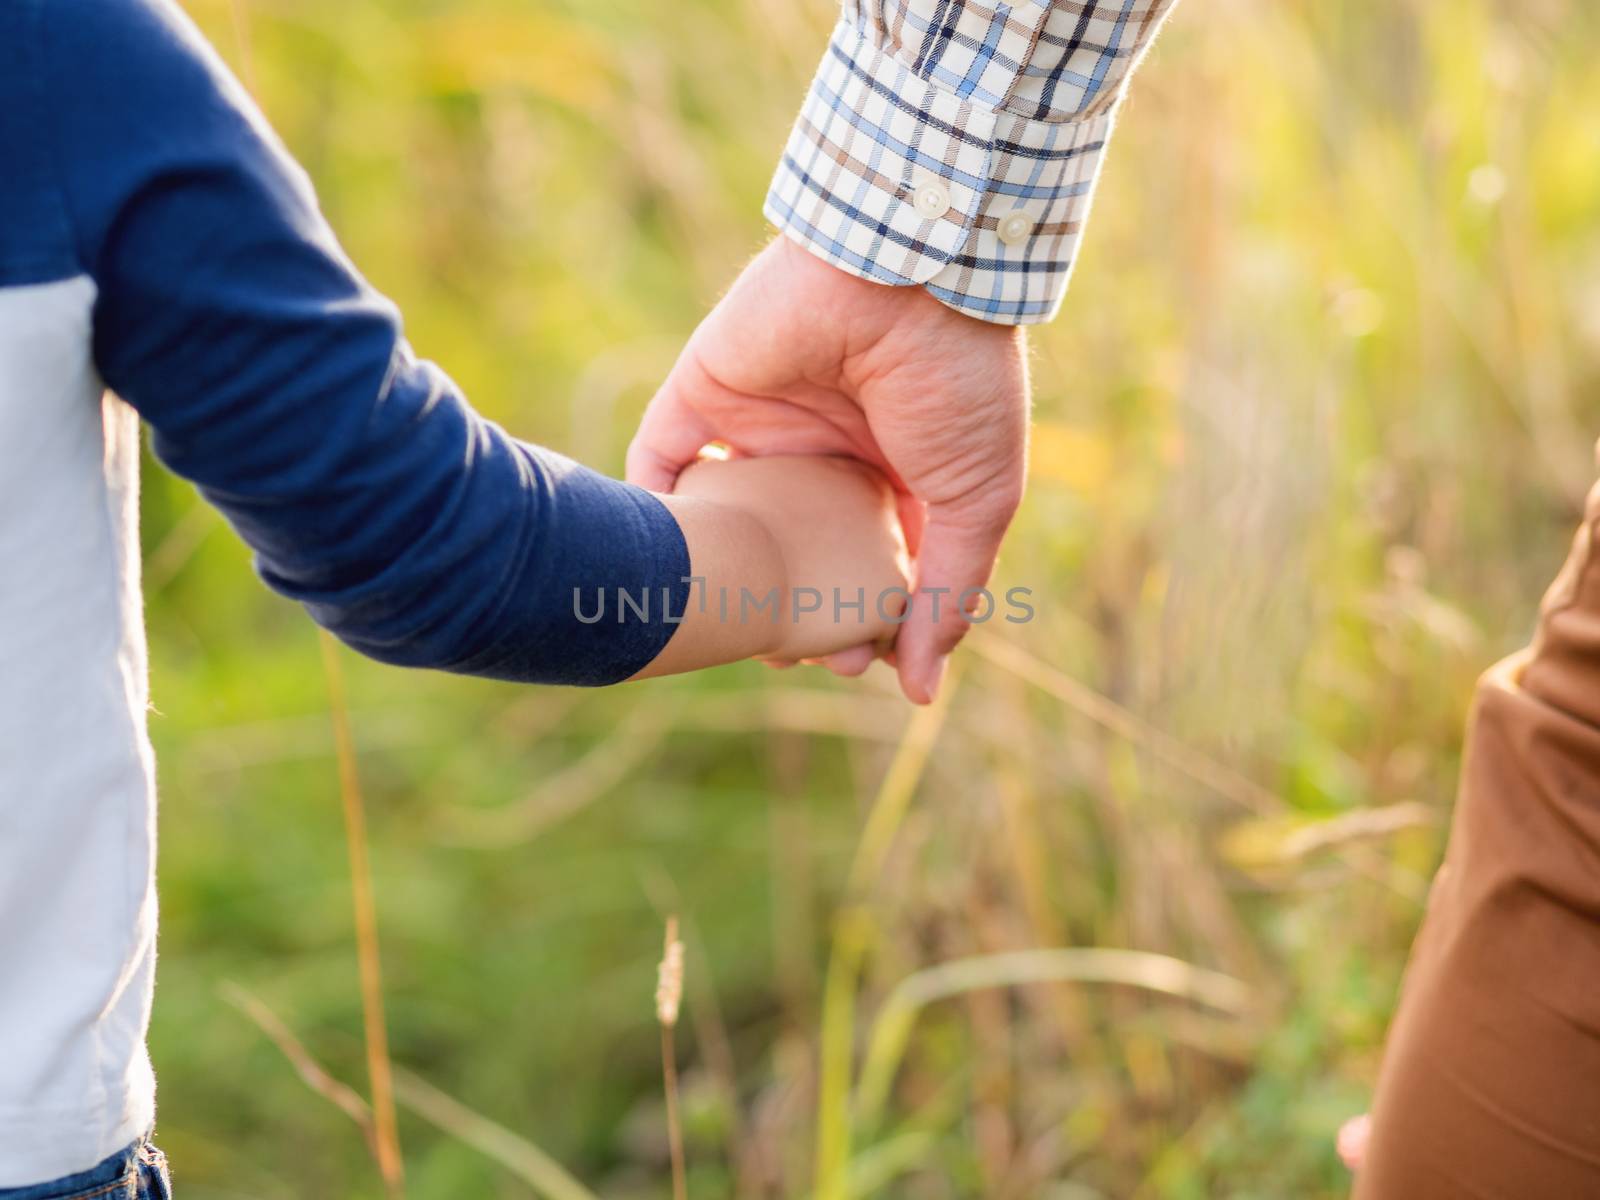 Father and son hold hands. Emotional and moral support. Man and boy shake hands. Golden hour outdoors. Natural summer or autumn background.